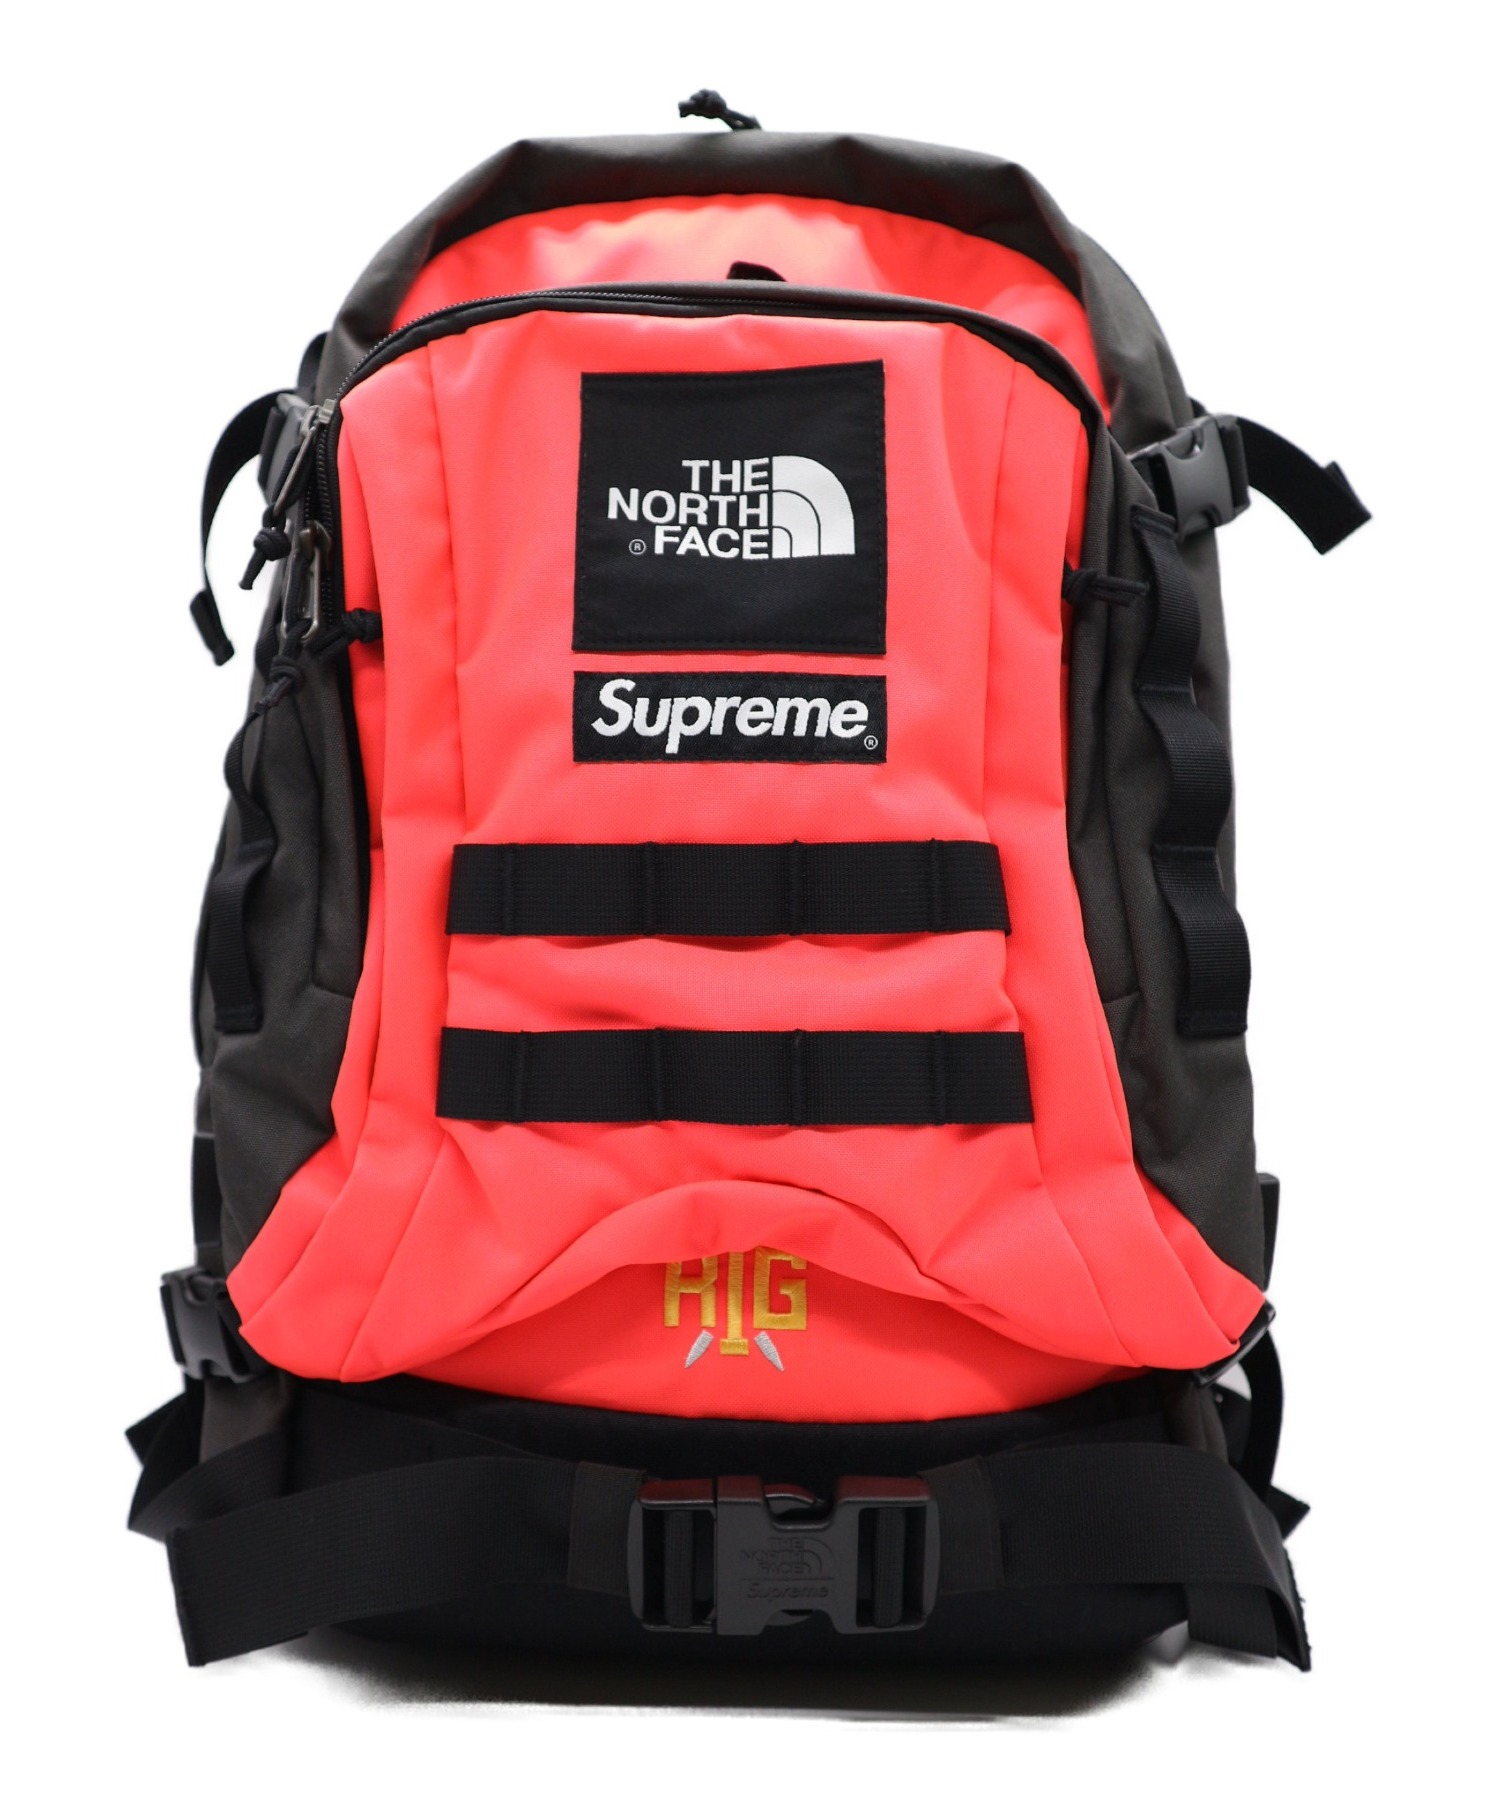 SUPREME×THE NORTH FACE (シュプリーム ×ザノースフェイス) RTG Backpack ピンク×ブラック NF0A3VYA